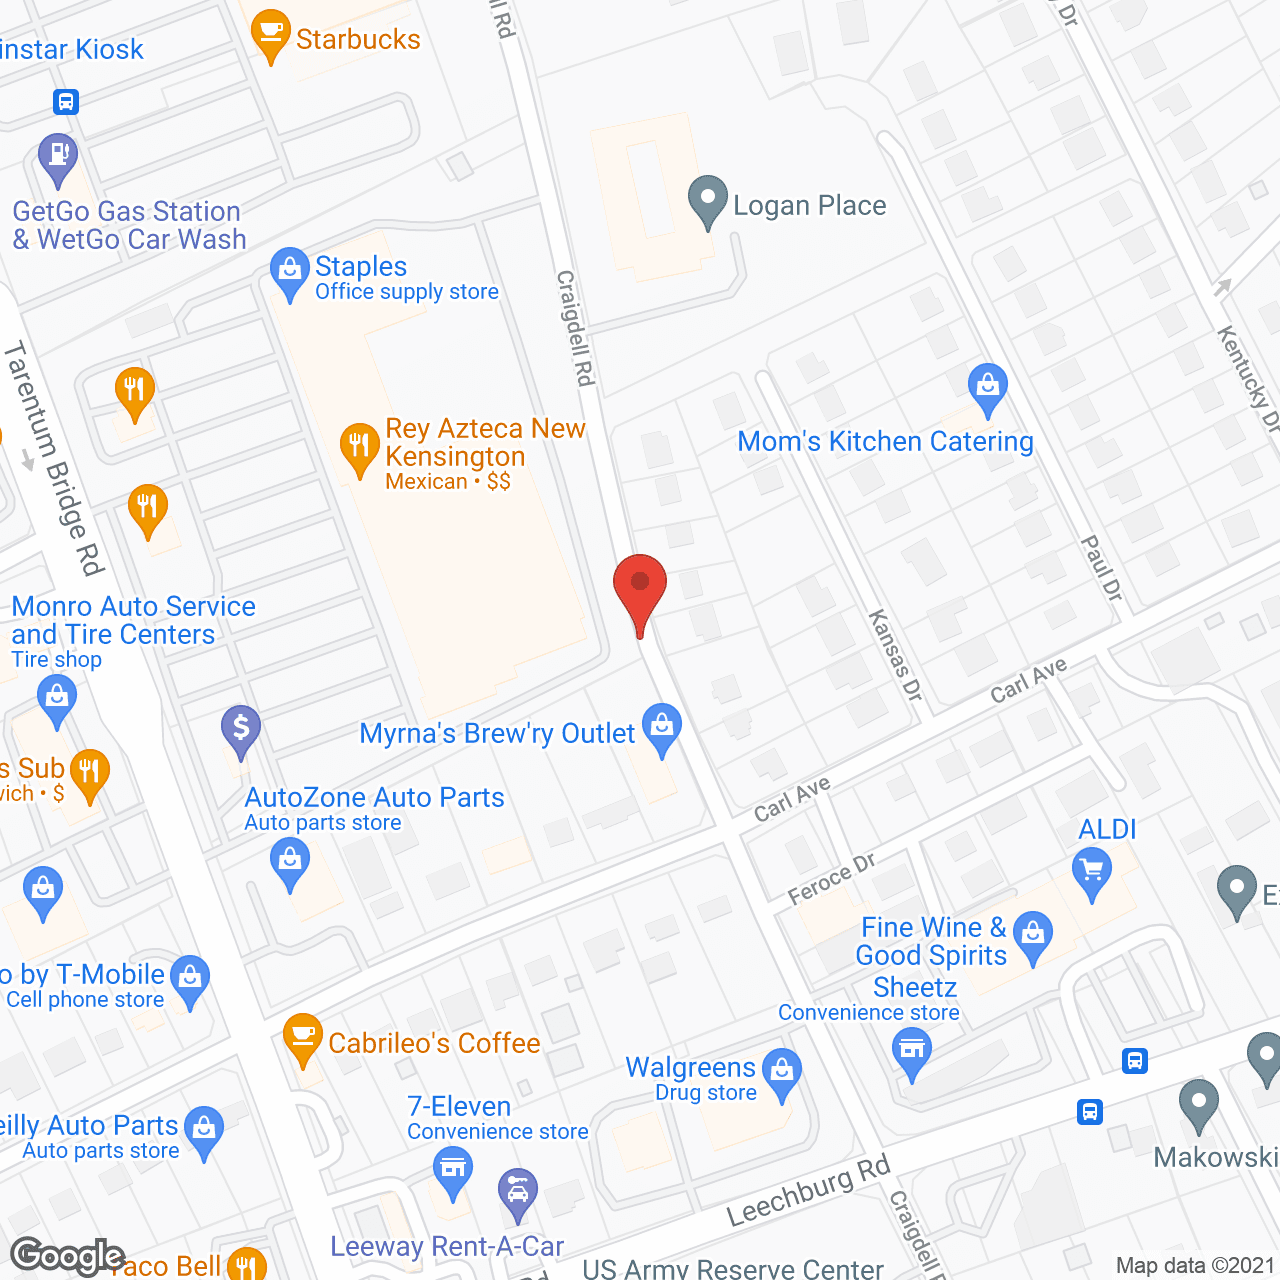 Logan Place in google map